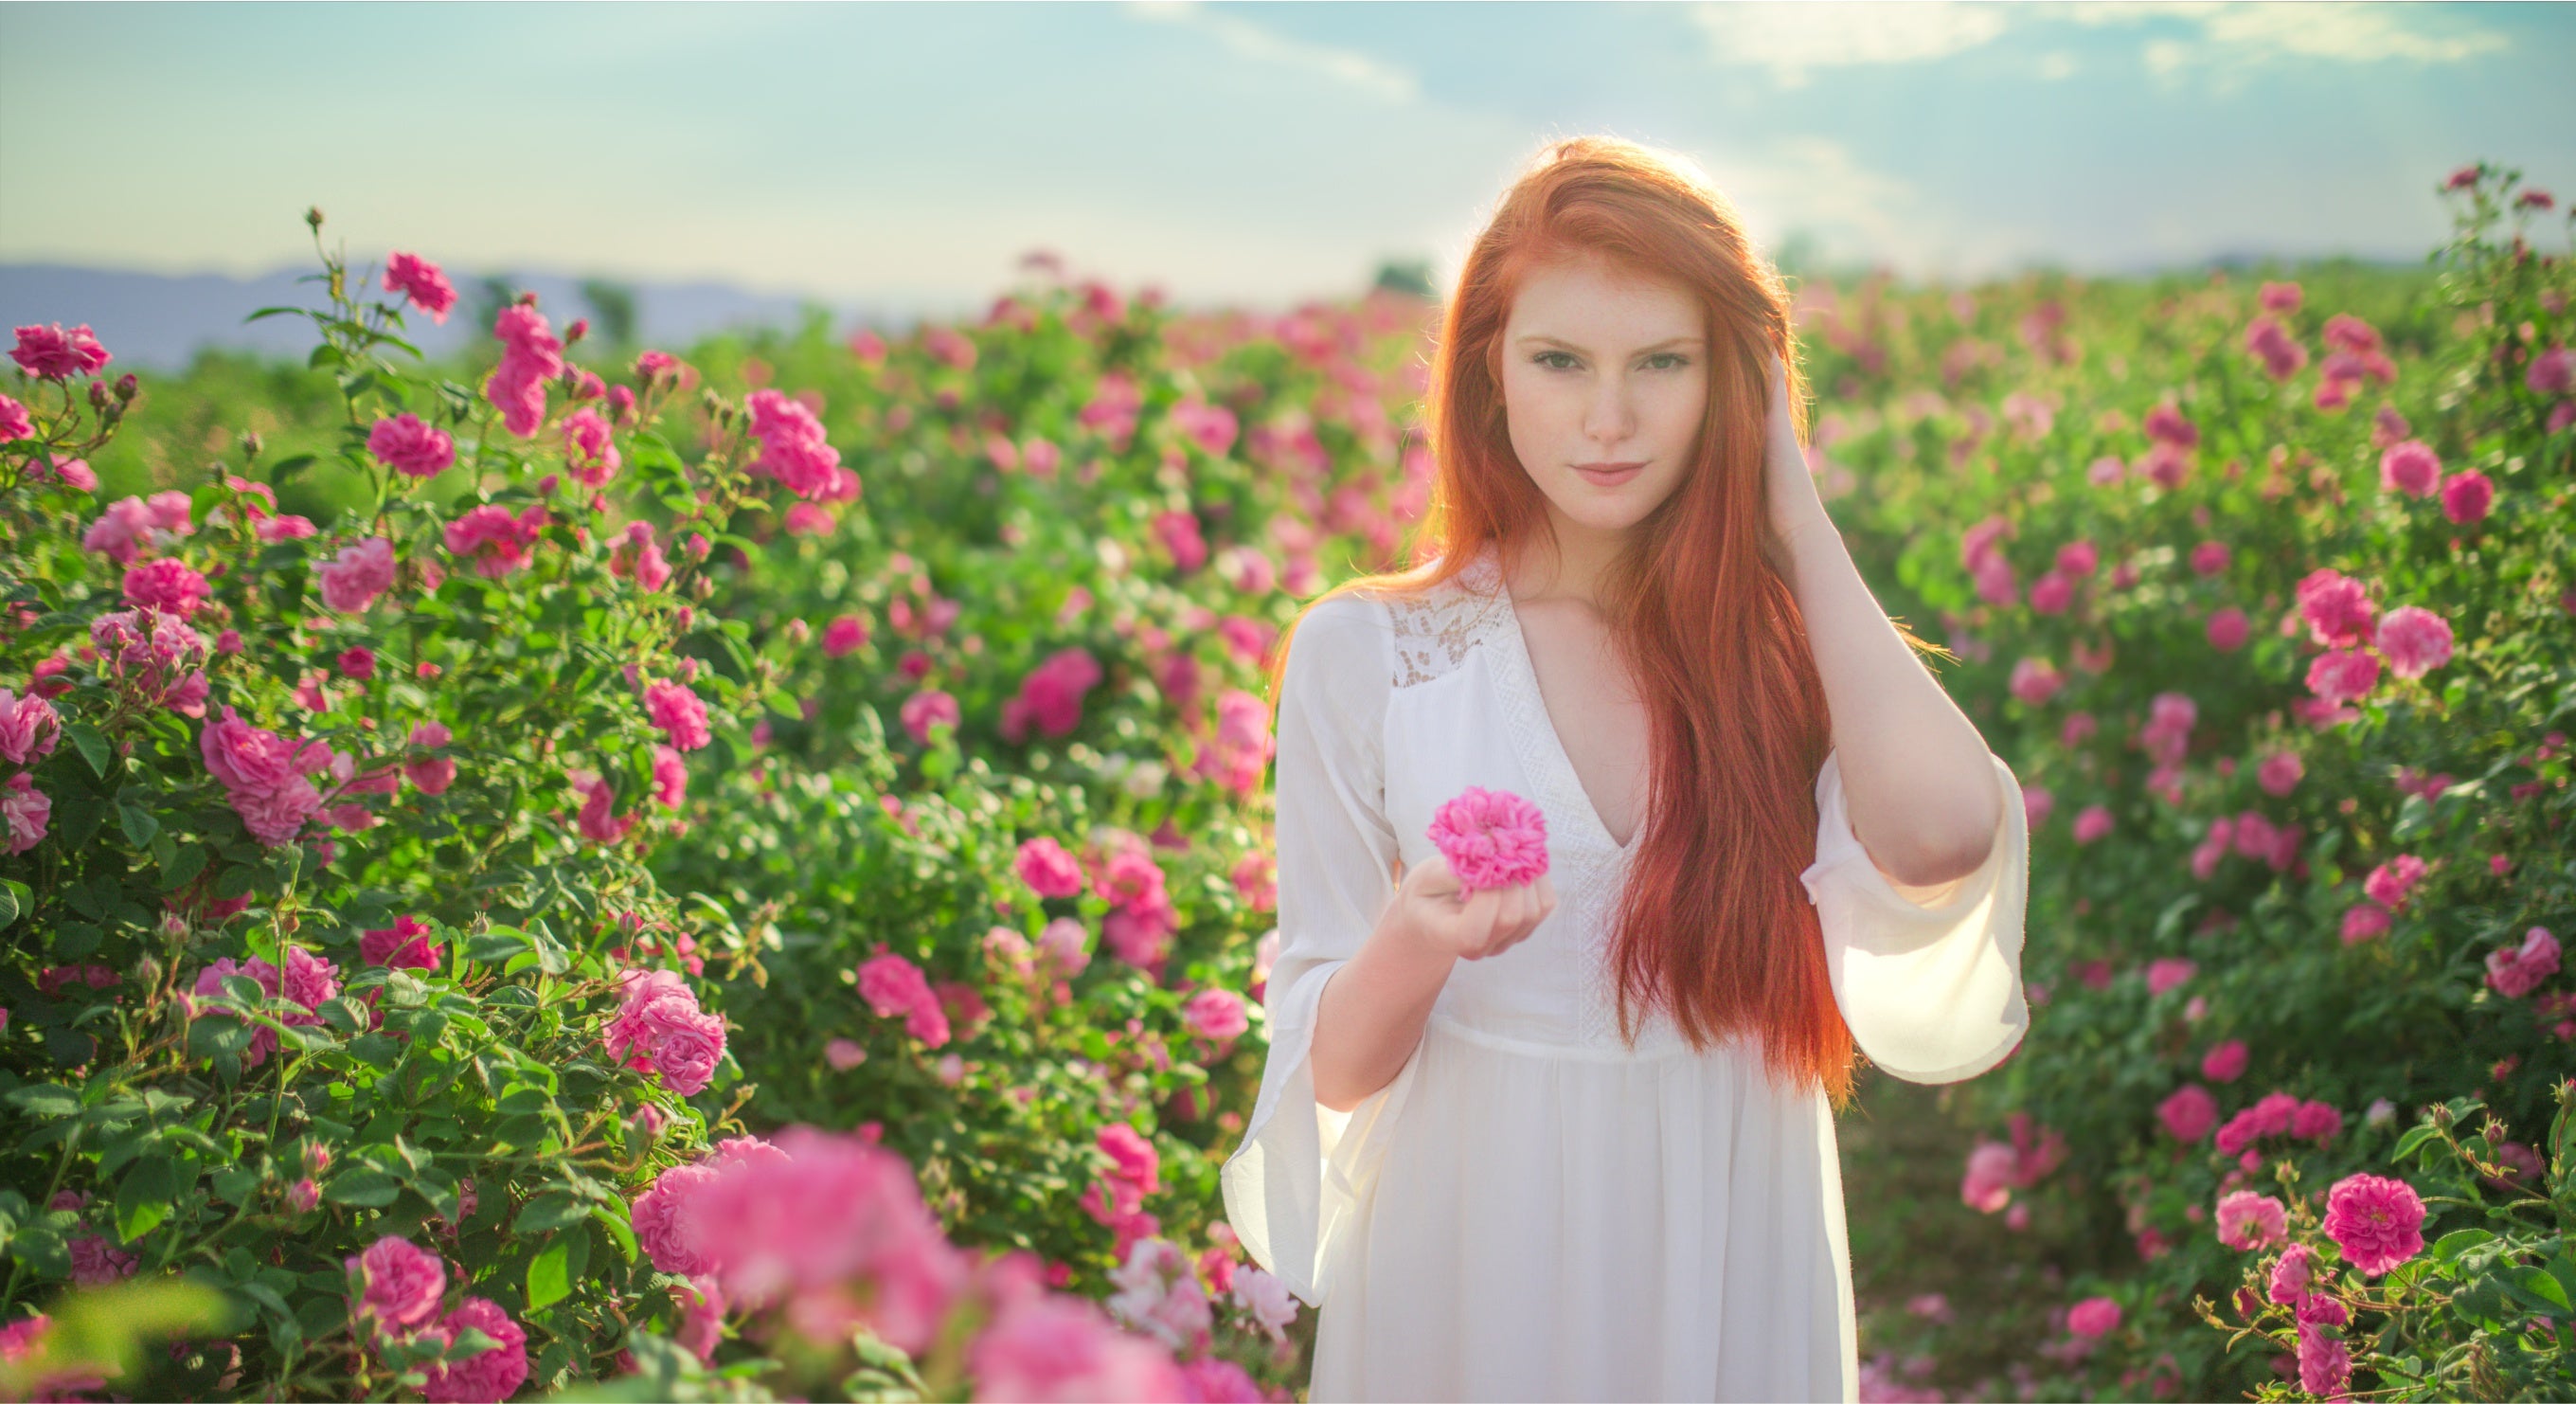 A woman with red hair standing in a field of Bulgarian roses (Rosa Damascena).